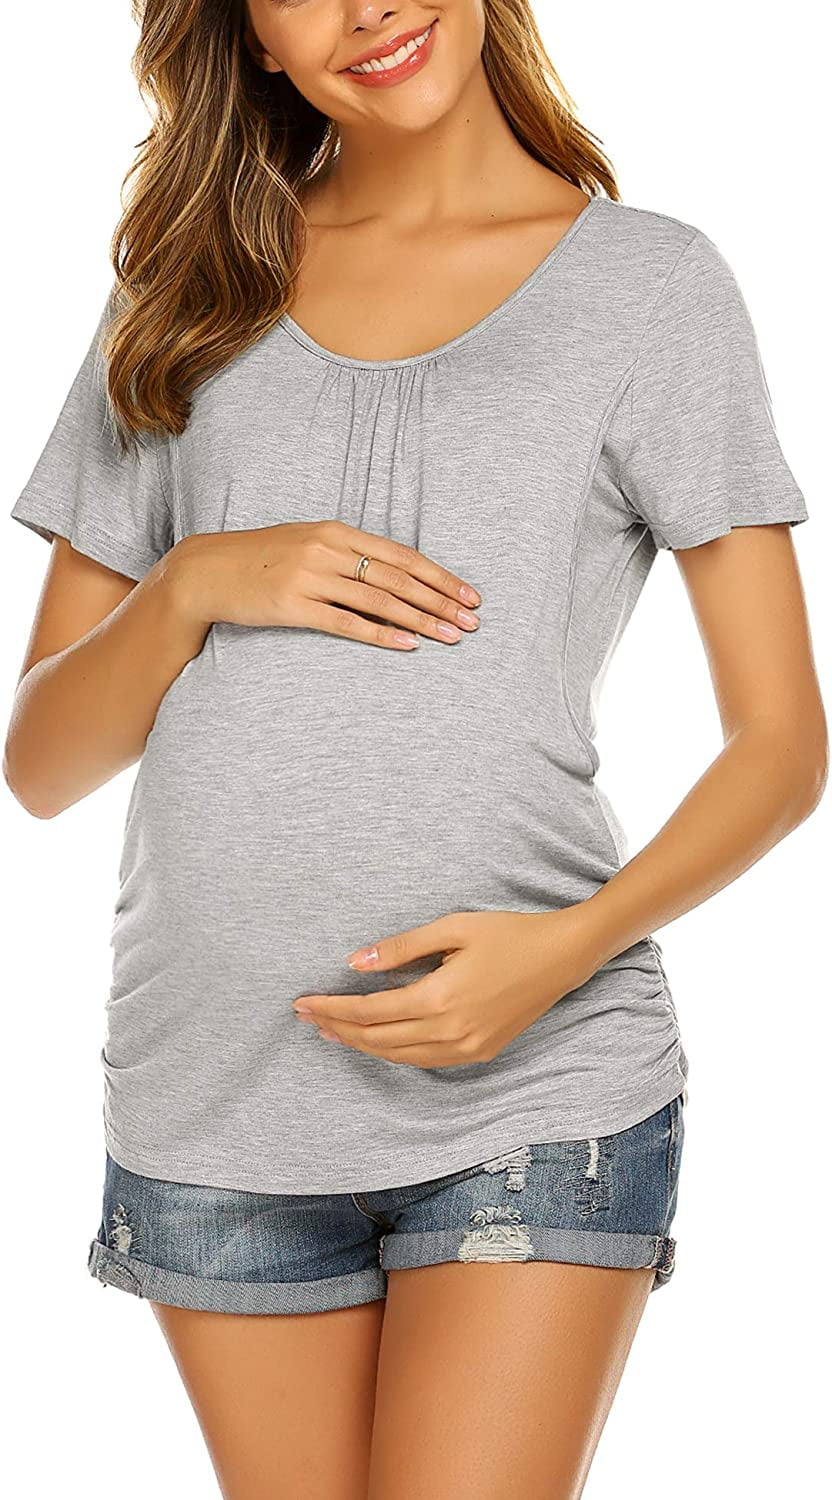 Ekouaer Women's Nursing Tops 3 Pack for Breastfeeding Shits Maternity Clothes Double Layer Pregnancy Tee Postpartum Shirt 